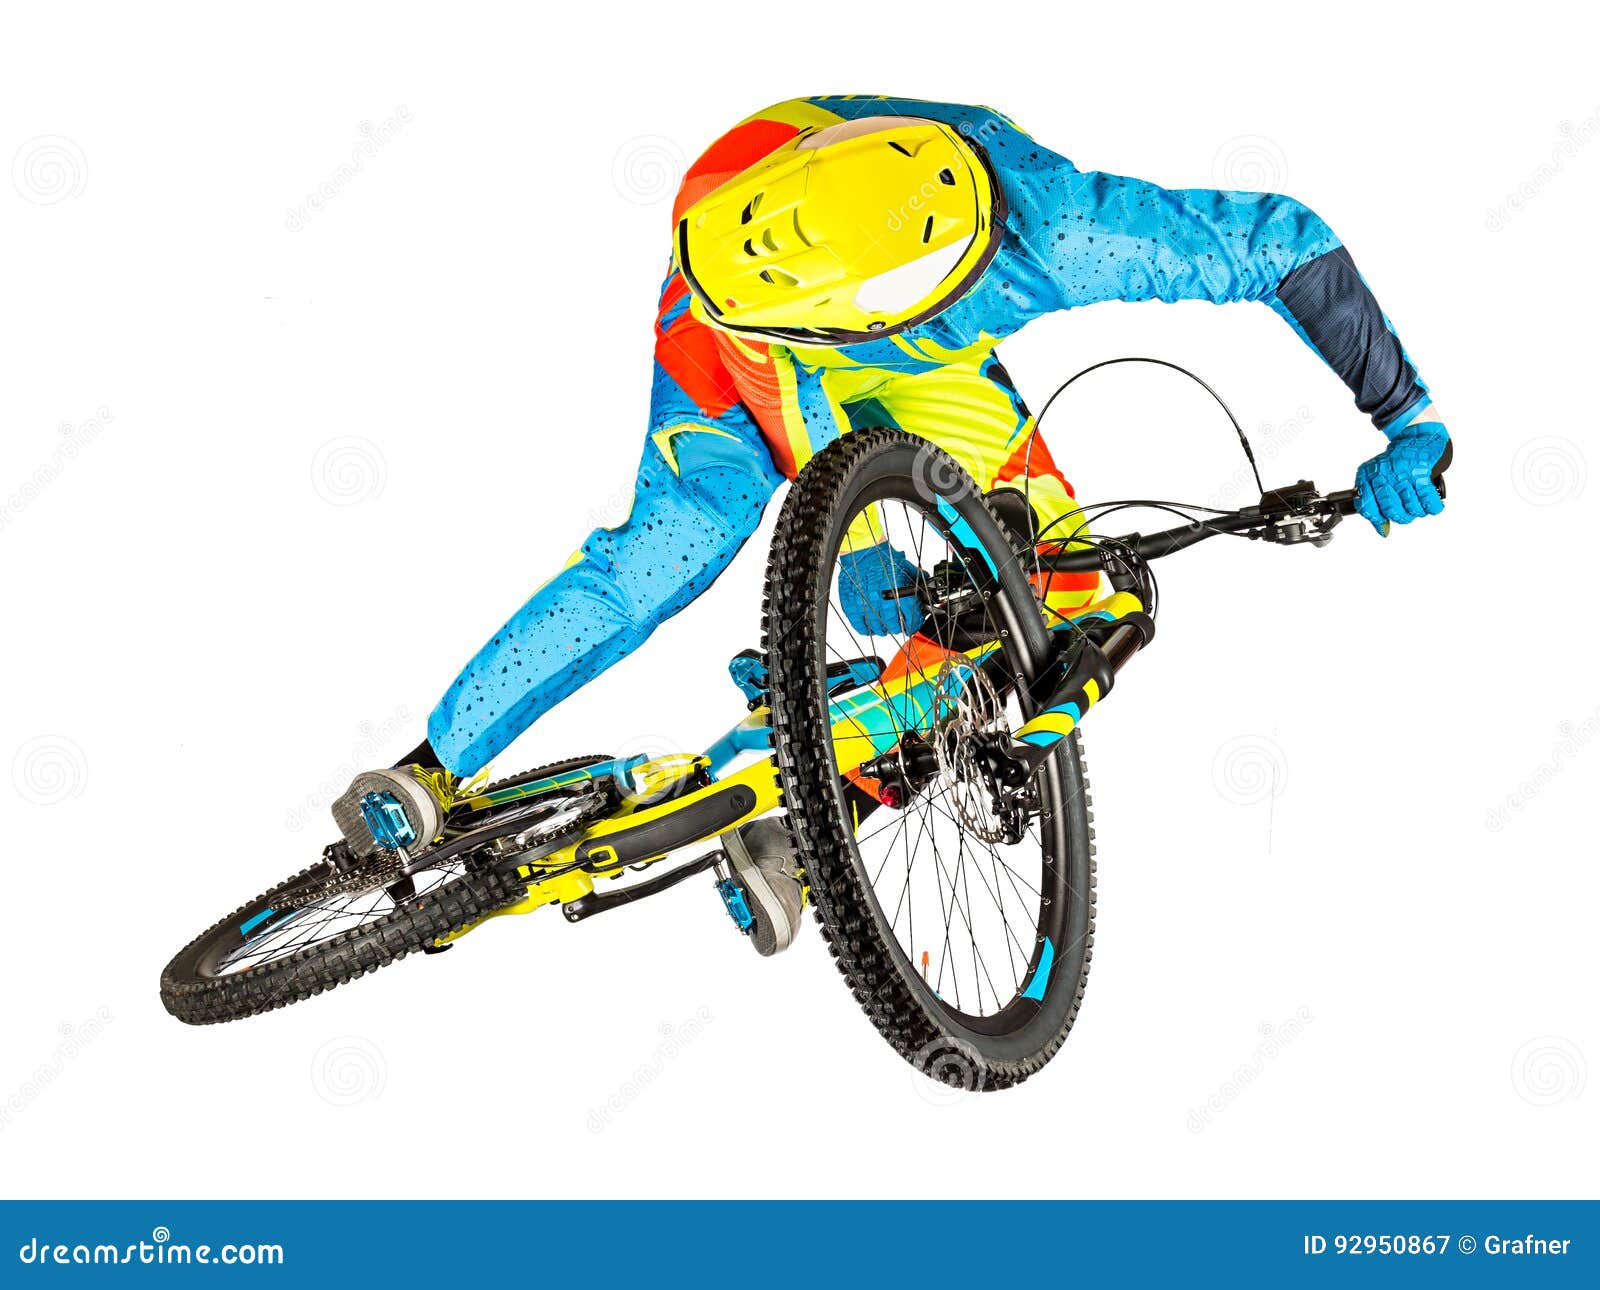 downhill rider extreme whip jump